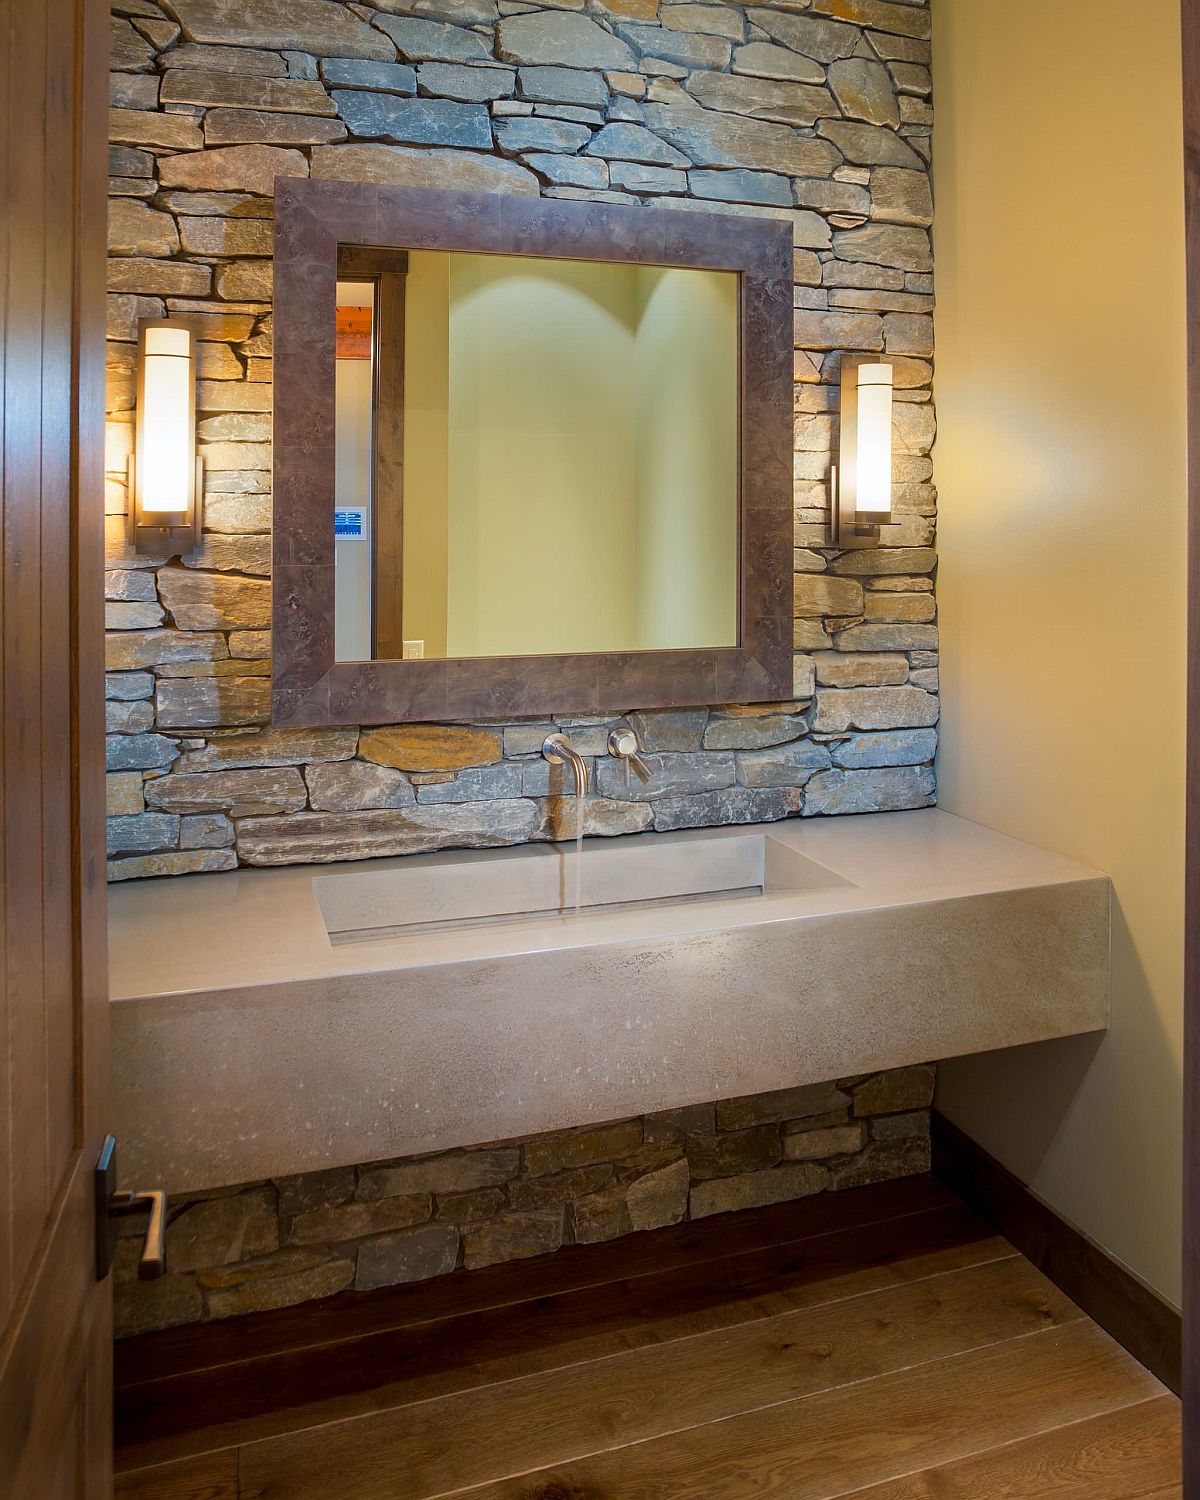 Concrete-vanity-in-the-bathroom-offers-a-cool-alternative-to-stone-vanities